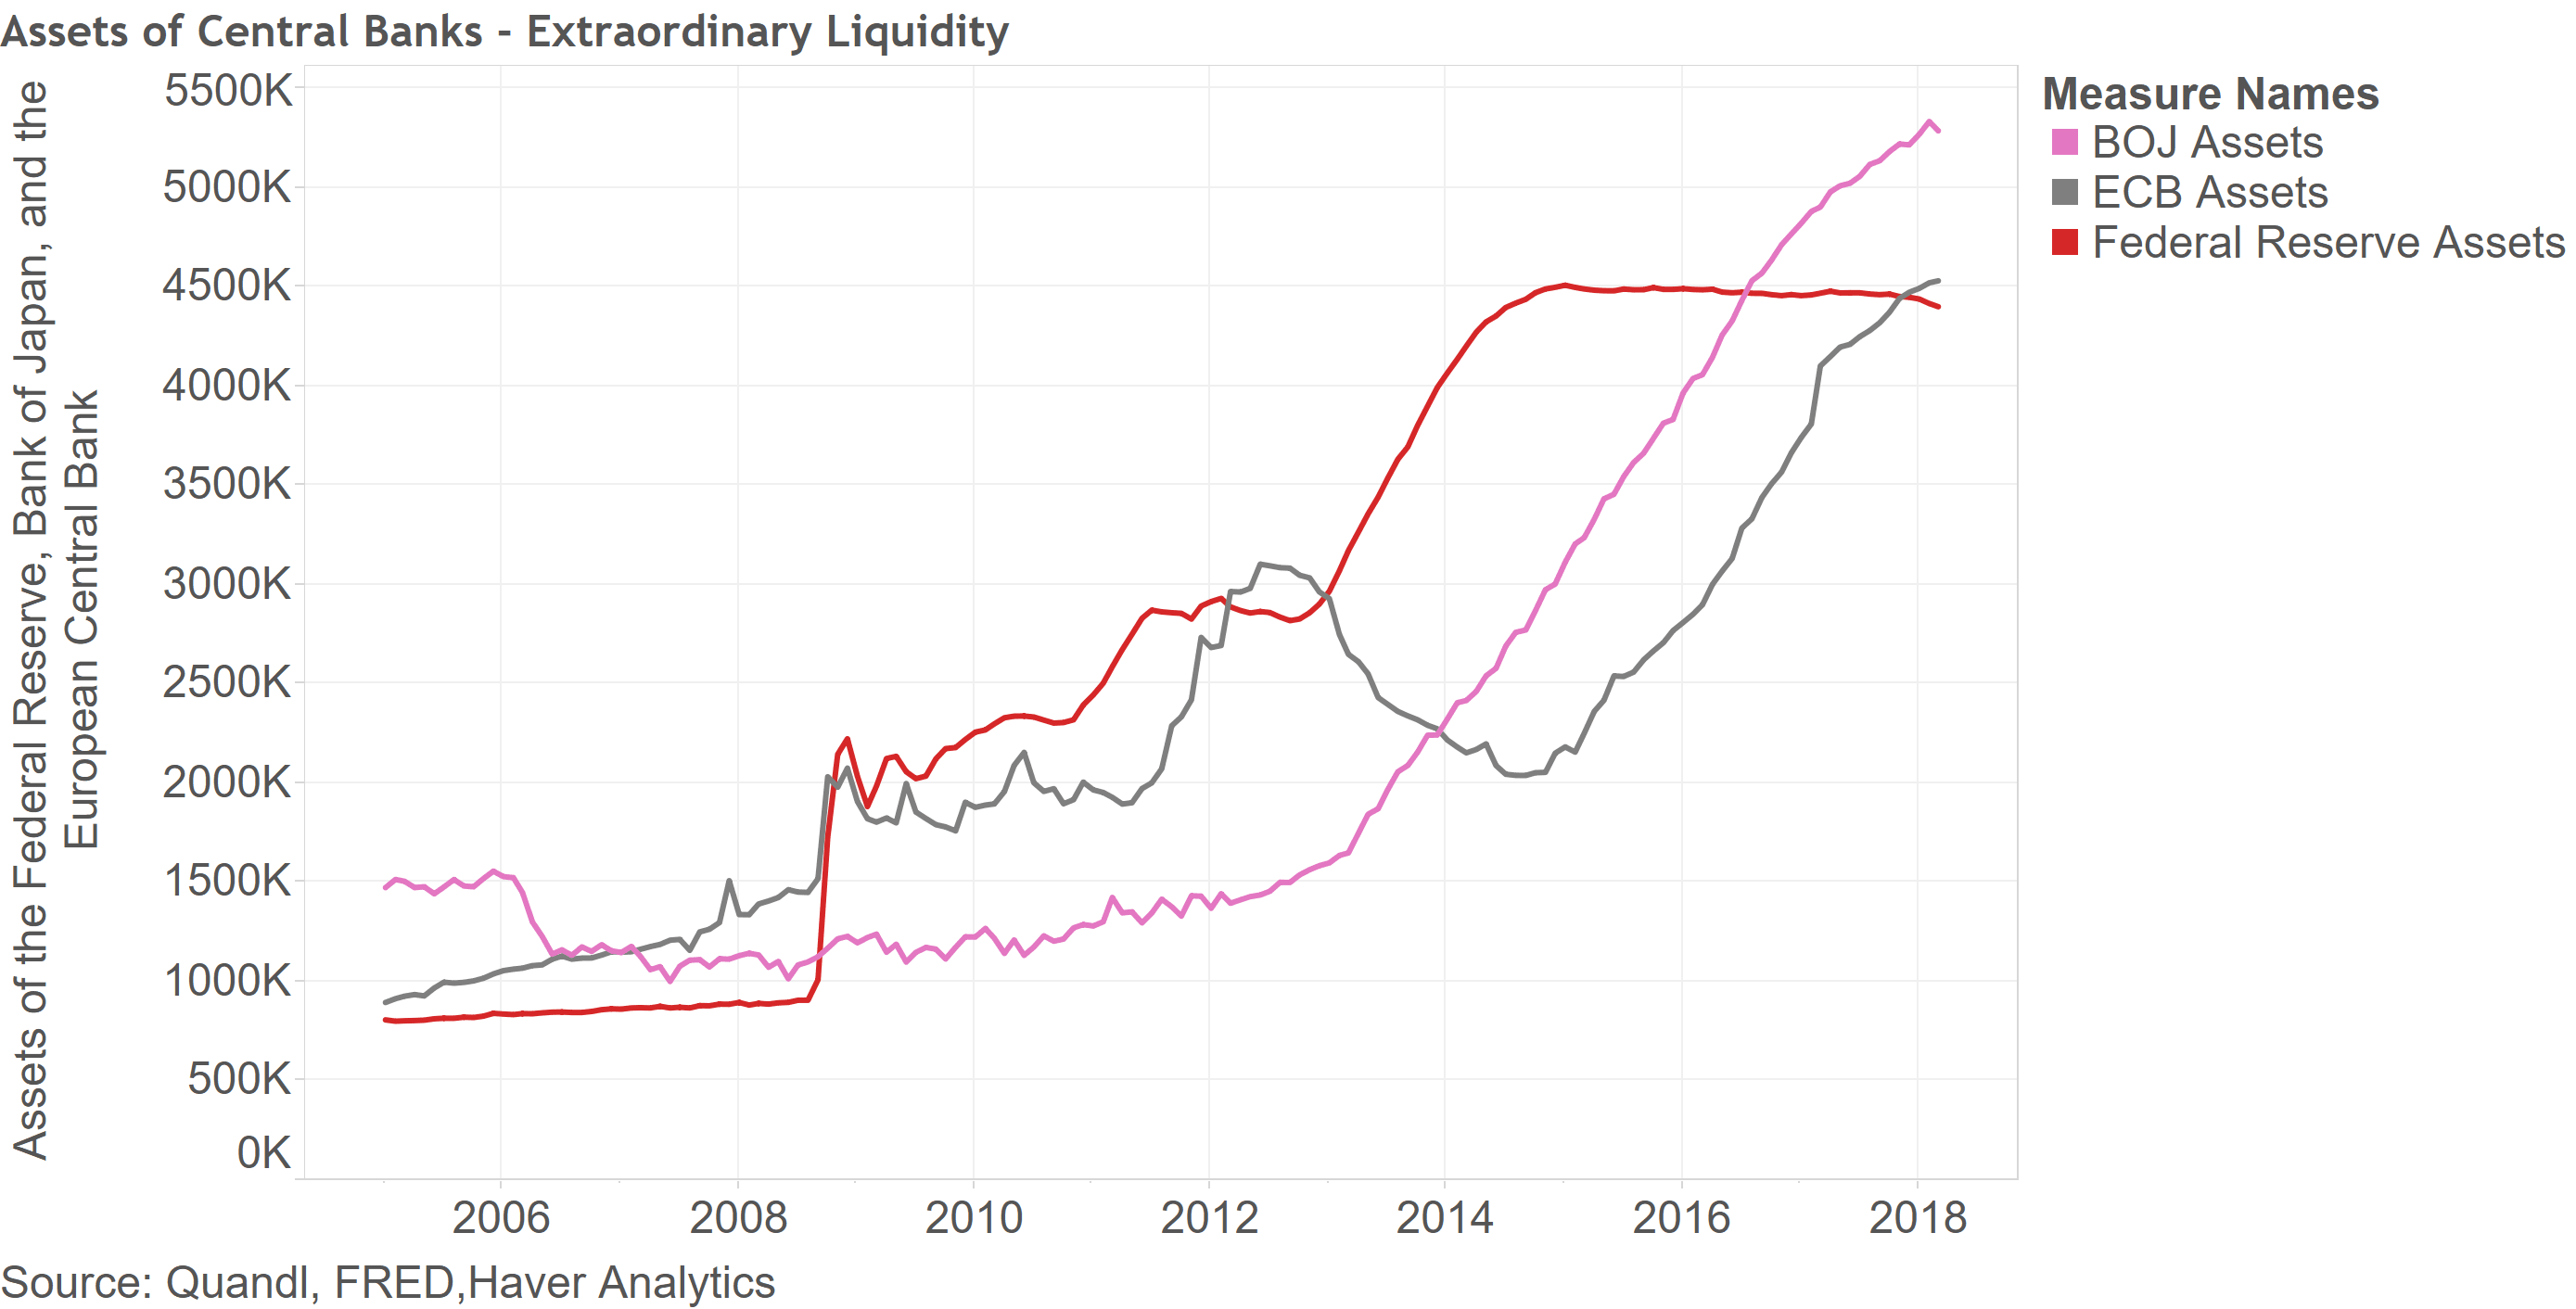 Assets of Central Banks Extraordinary Liquidity